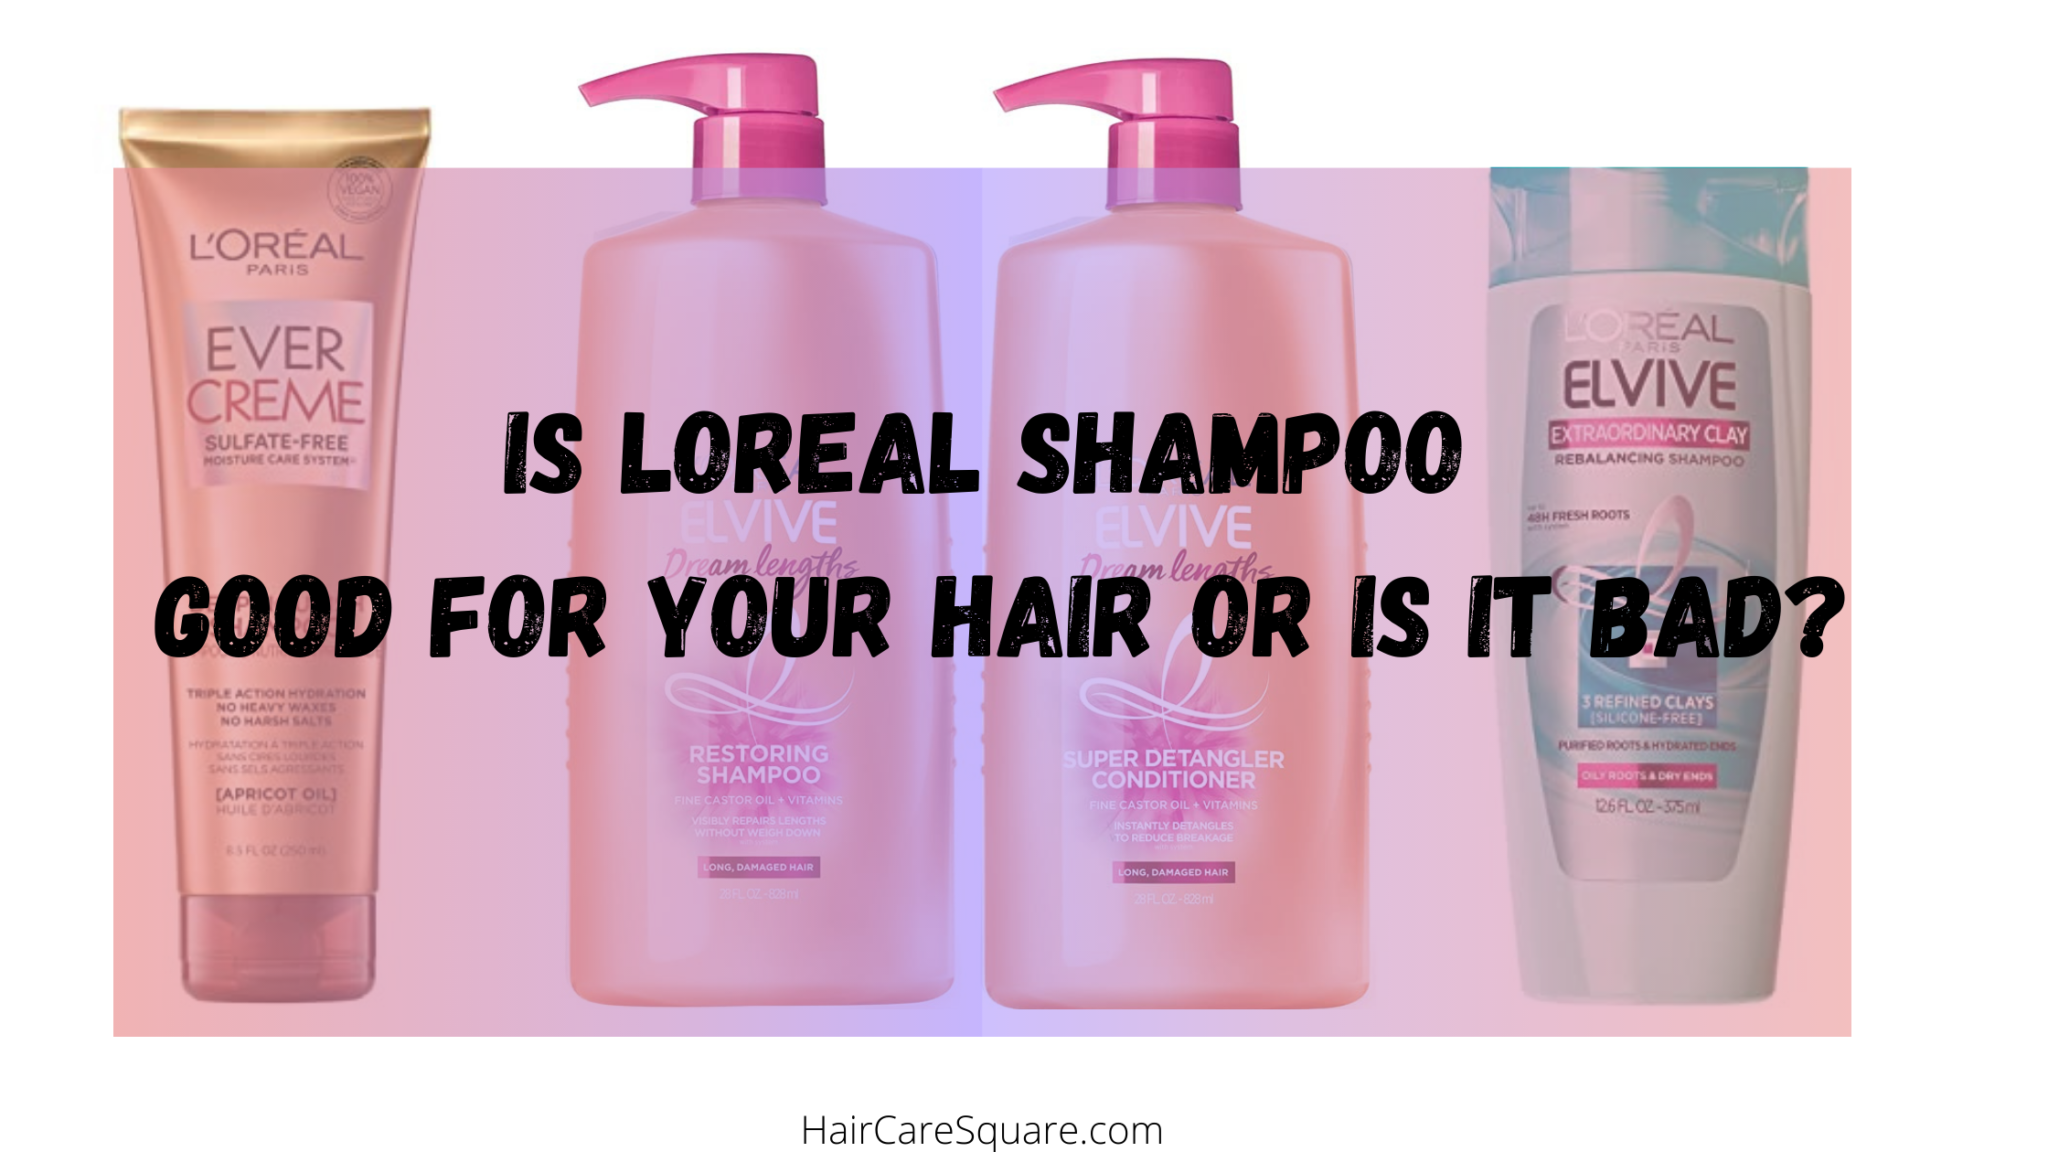 Is Loreal Shampoo Good For Hair? Or Is it Bad? Let’s Discuss